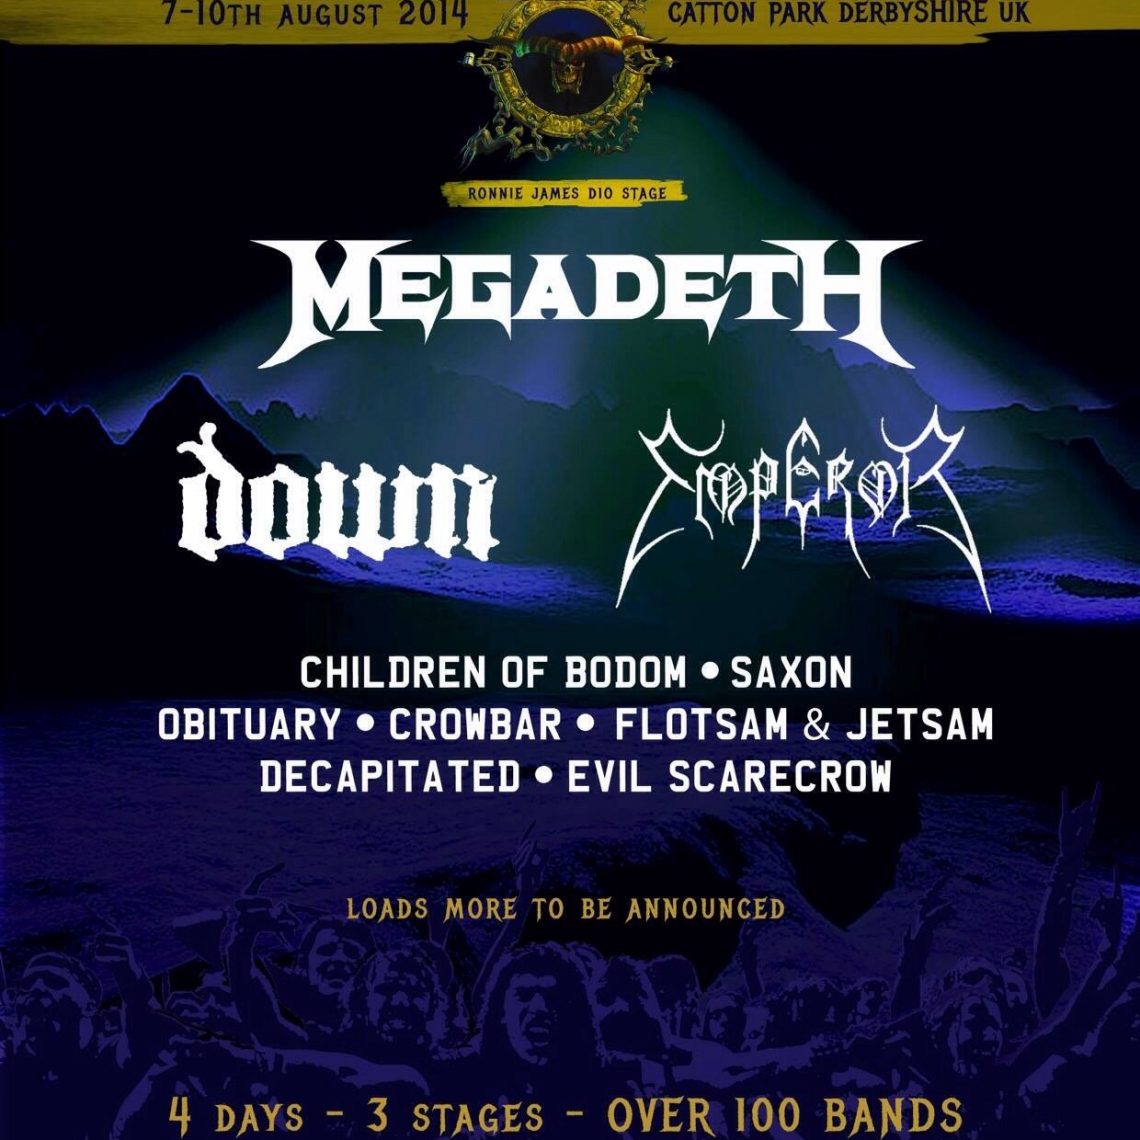 Bloodstock 2014 – 3 more bands announced